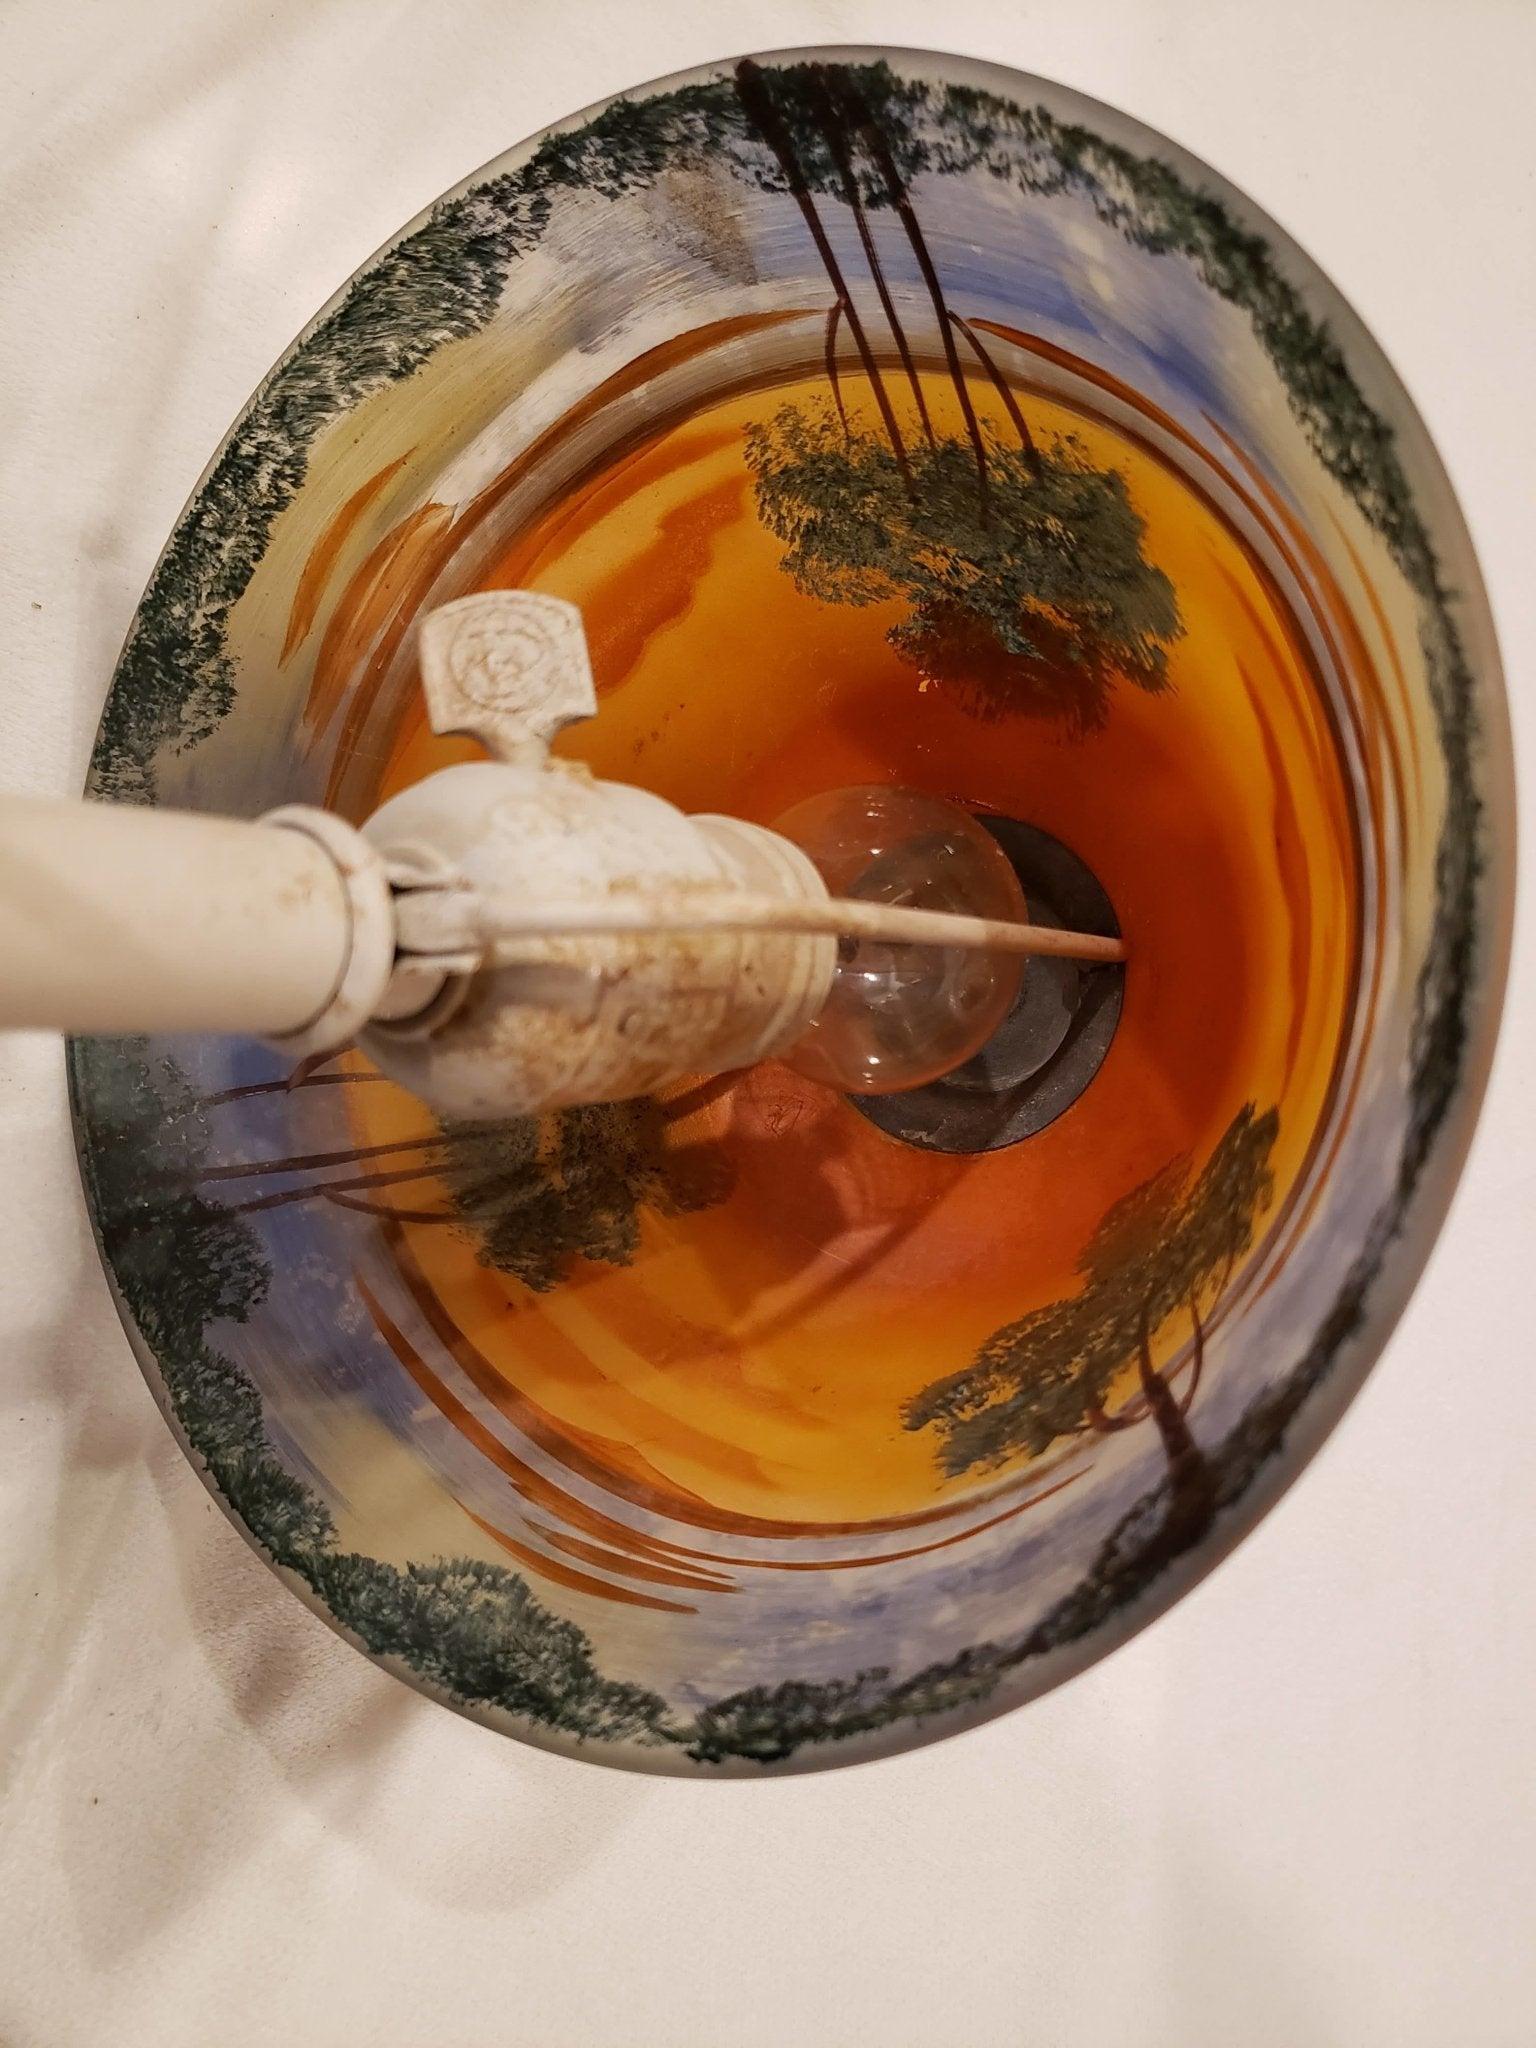 Wonderfully hand-painted sunset scenery reverse-painted on an 8 inch glass shade. The lamp base is nothing special, a standard white painted base, shade can easily be moved to any other glass shade lamp base to give it even more flare. Enjoy the